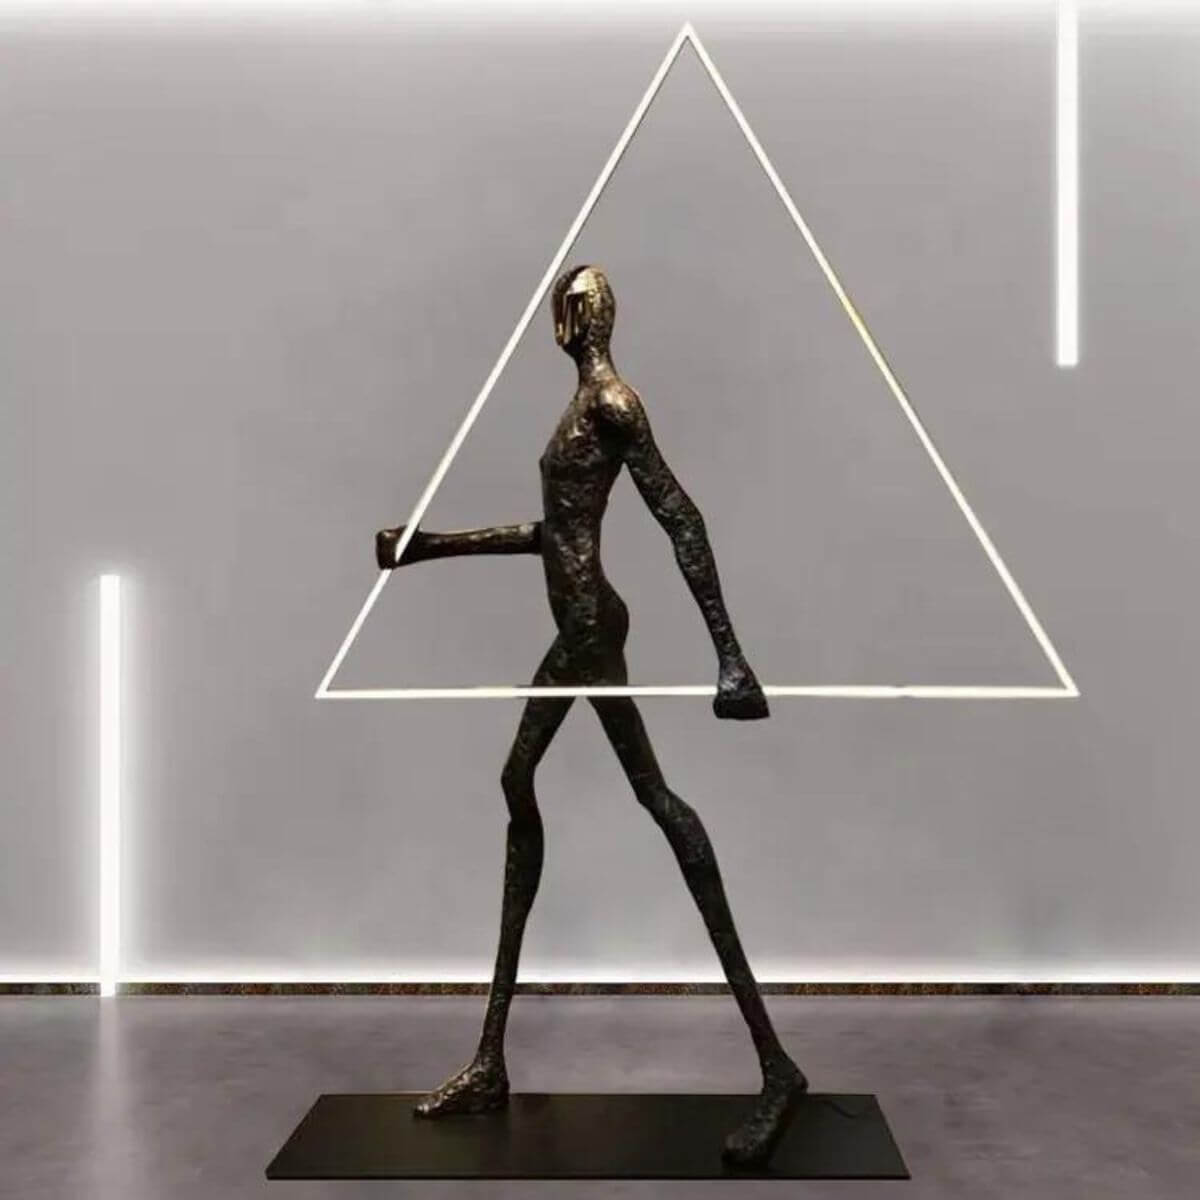 Human Statue Floor Lamp With Triangle 13